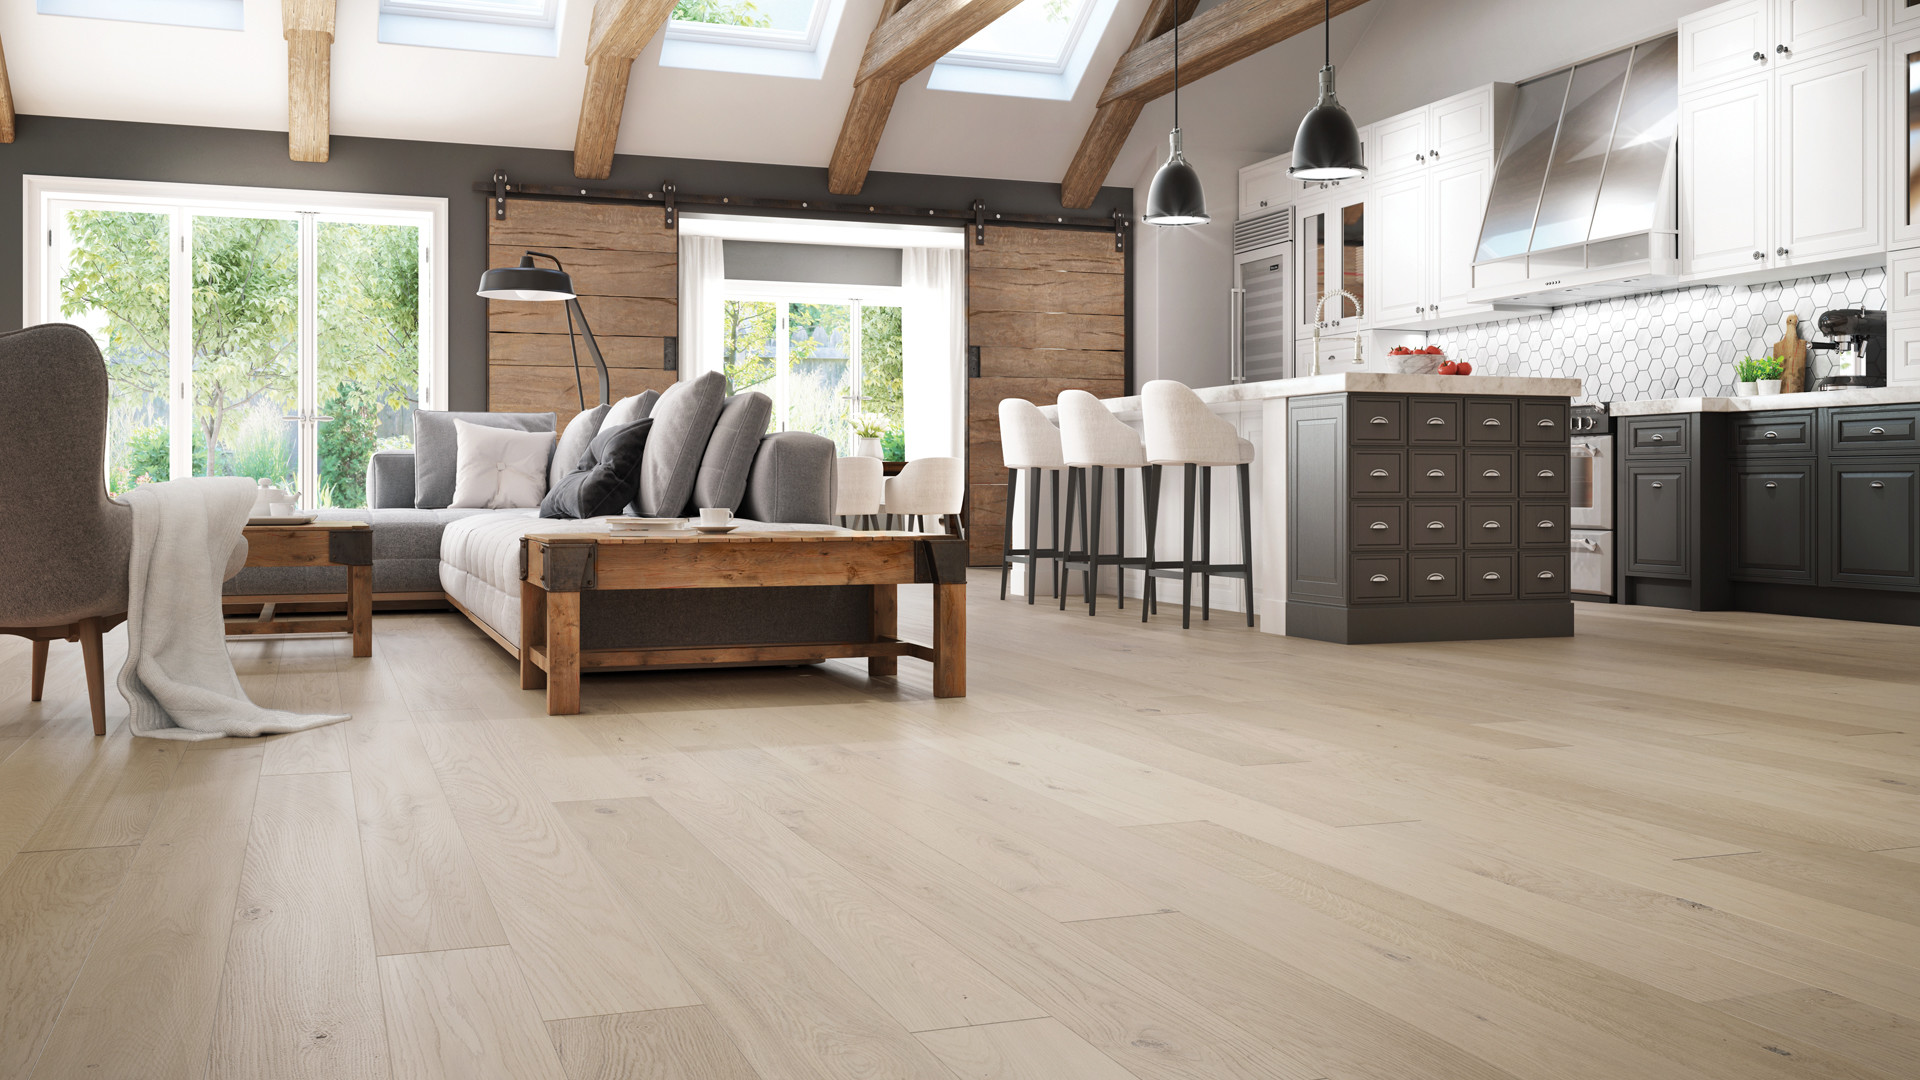 14 Ideal Trends In Hardwood Flooring 2015 2024 free download trends in hardwood flooring 2015 of 4 latest hardwood flooring trends of 2018 lauzon flooring intended for this technology brings your hardwood floors and well being to a new level by improv